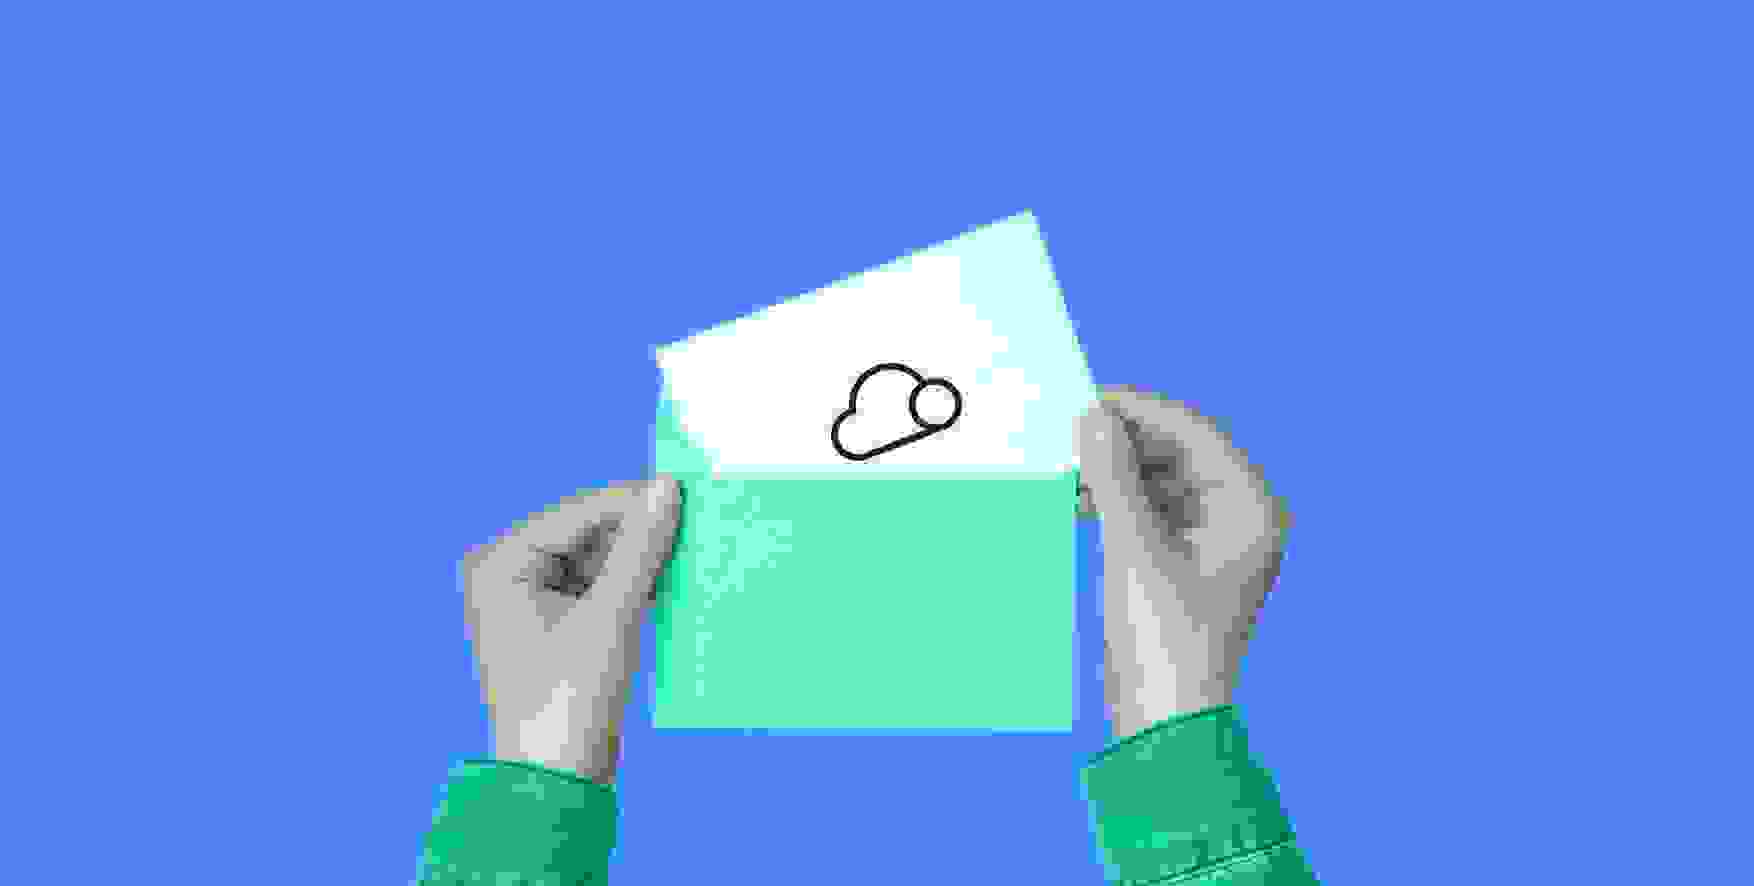 a sheet of paper with a cloud symbol in an envelope